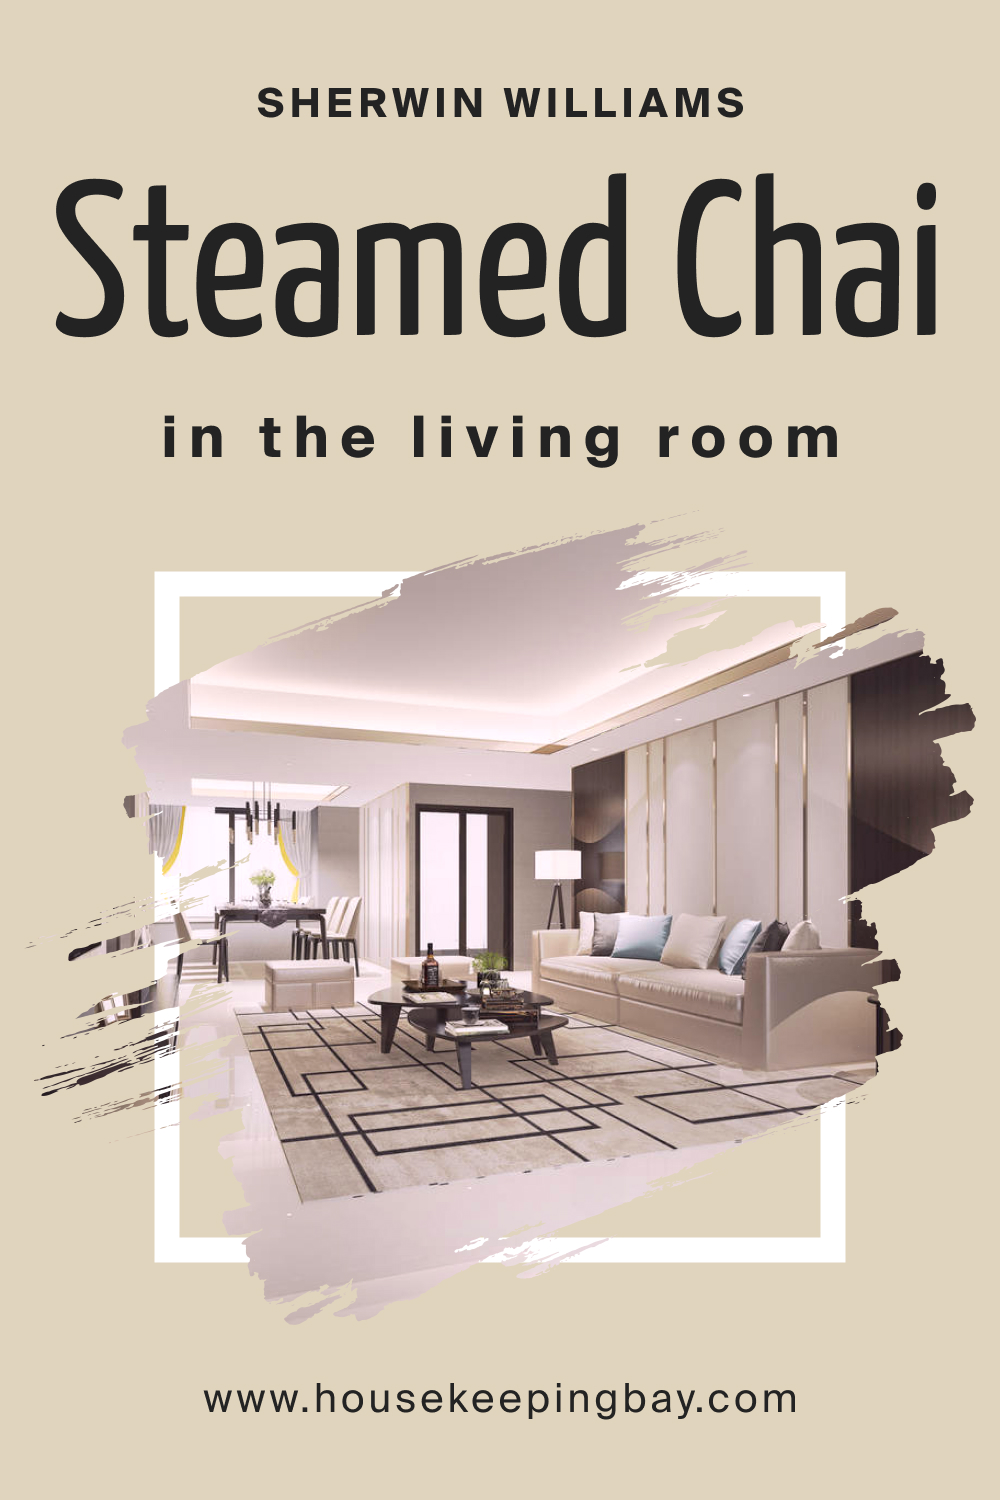 Sherwin Williams. SW 9509 Steamed Chai In the Living Room